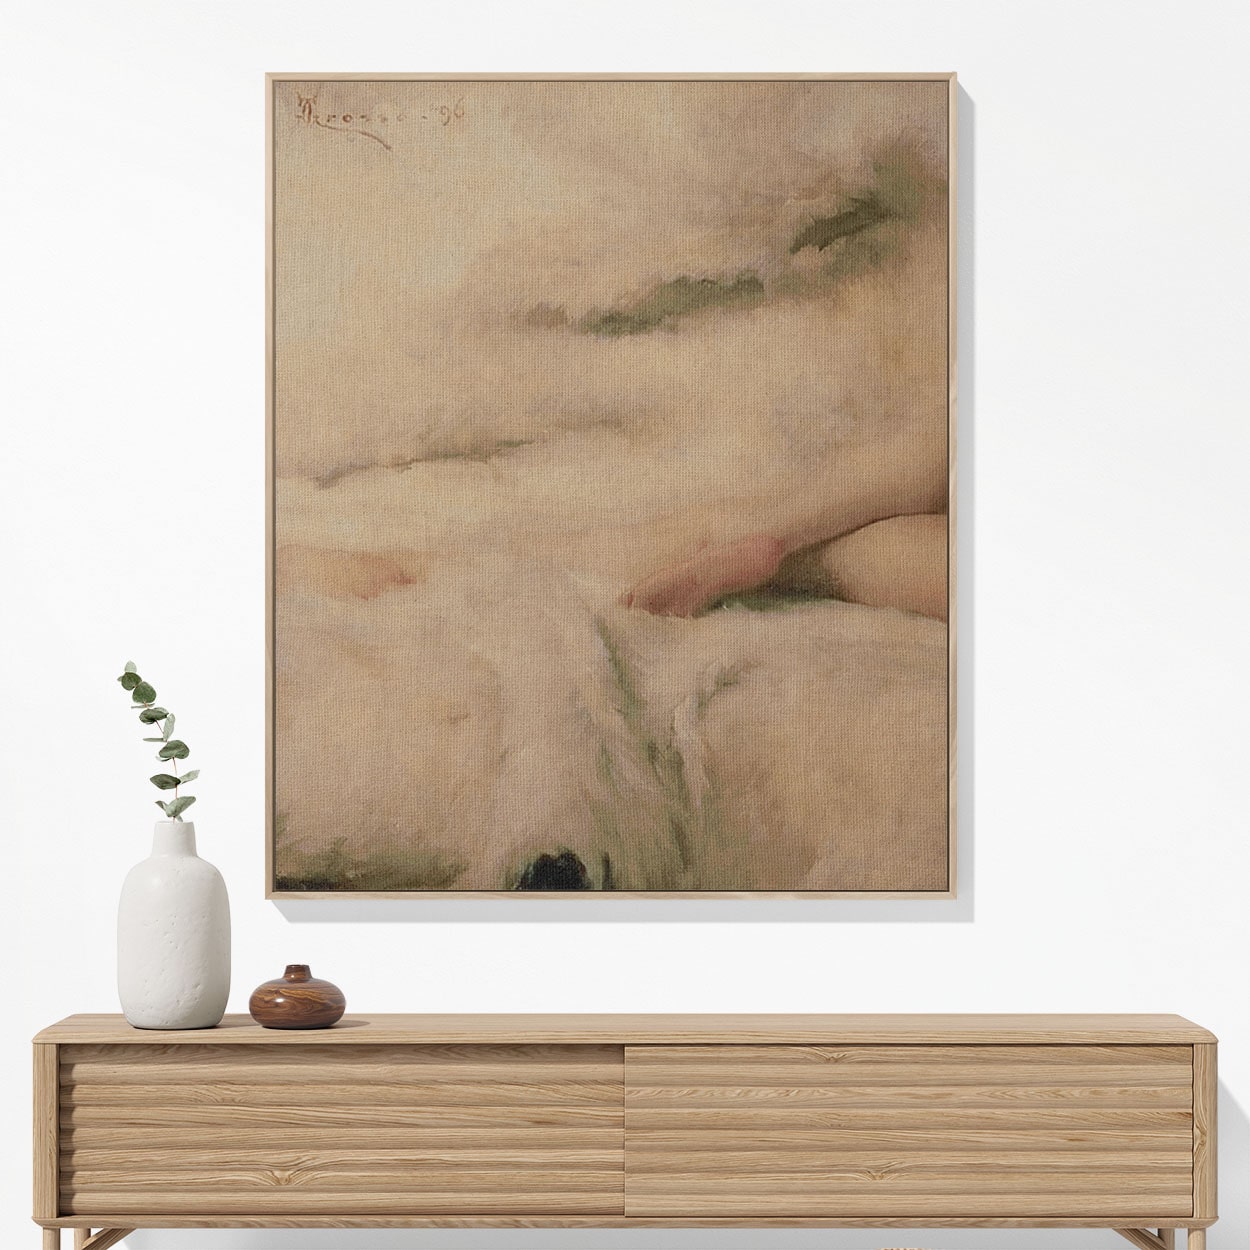 Soft Aesthetic Woven Blanket Woven Blanket Hanging on a Wall as Framed Wall Art